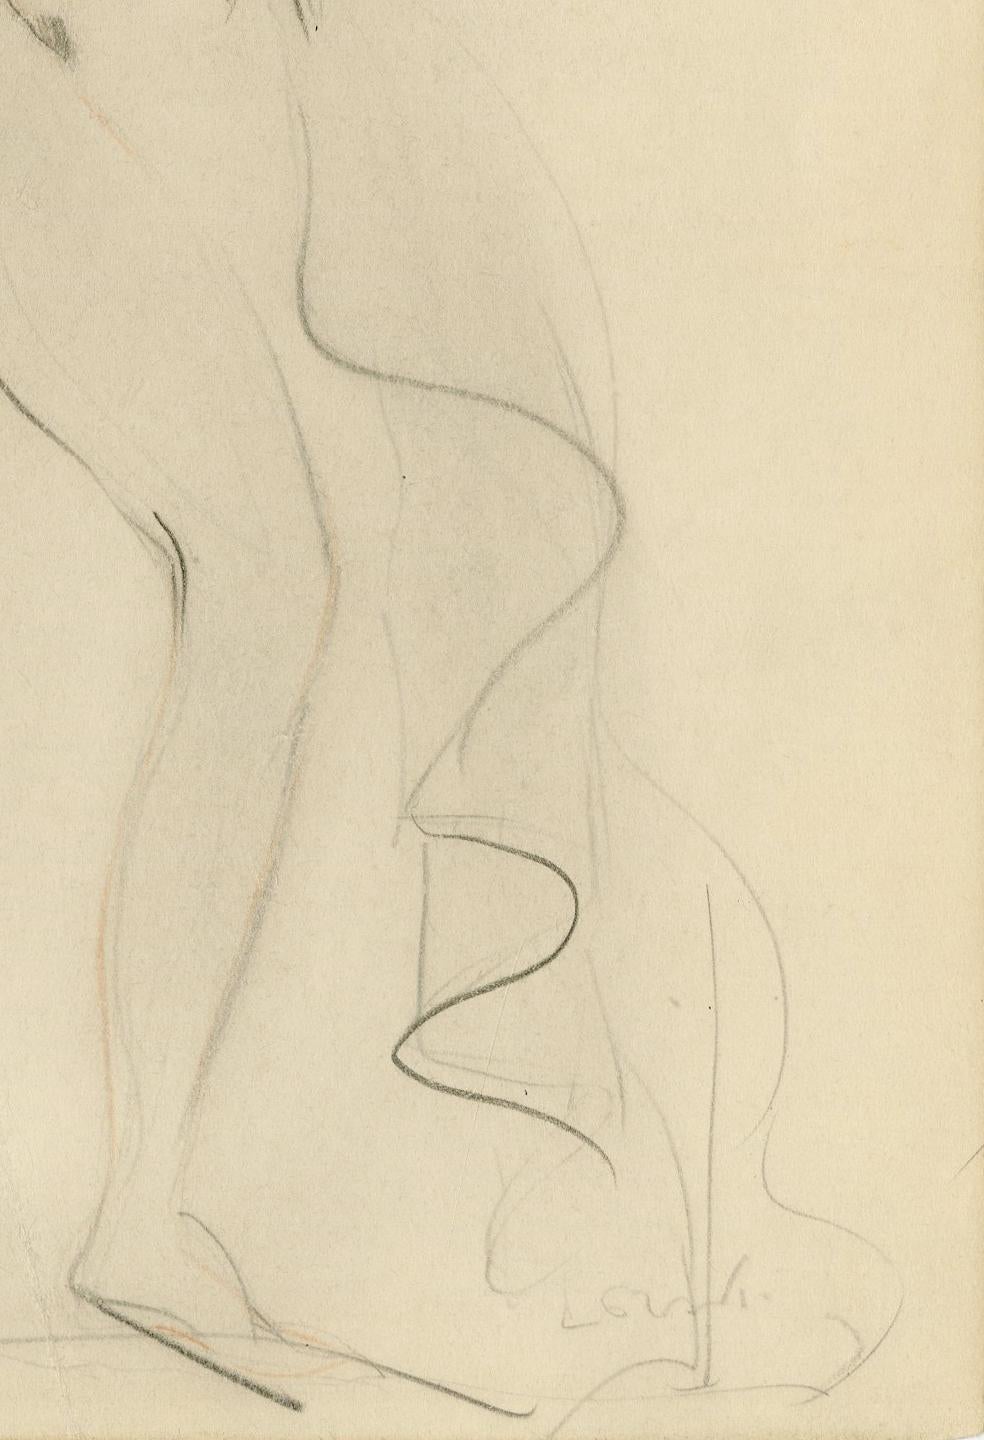 Untitled (Standing Female Nude)
Graphite on paper, c. 1930
Signed bottom right: Lorski (see photo)
Sheet size: 9 5/16 x 5 13/16 inches
From a sketchbook created while the artist was working in Paris
Condition: Good
Thin spots verso from previous